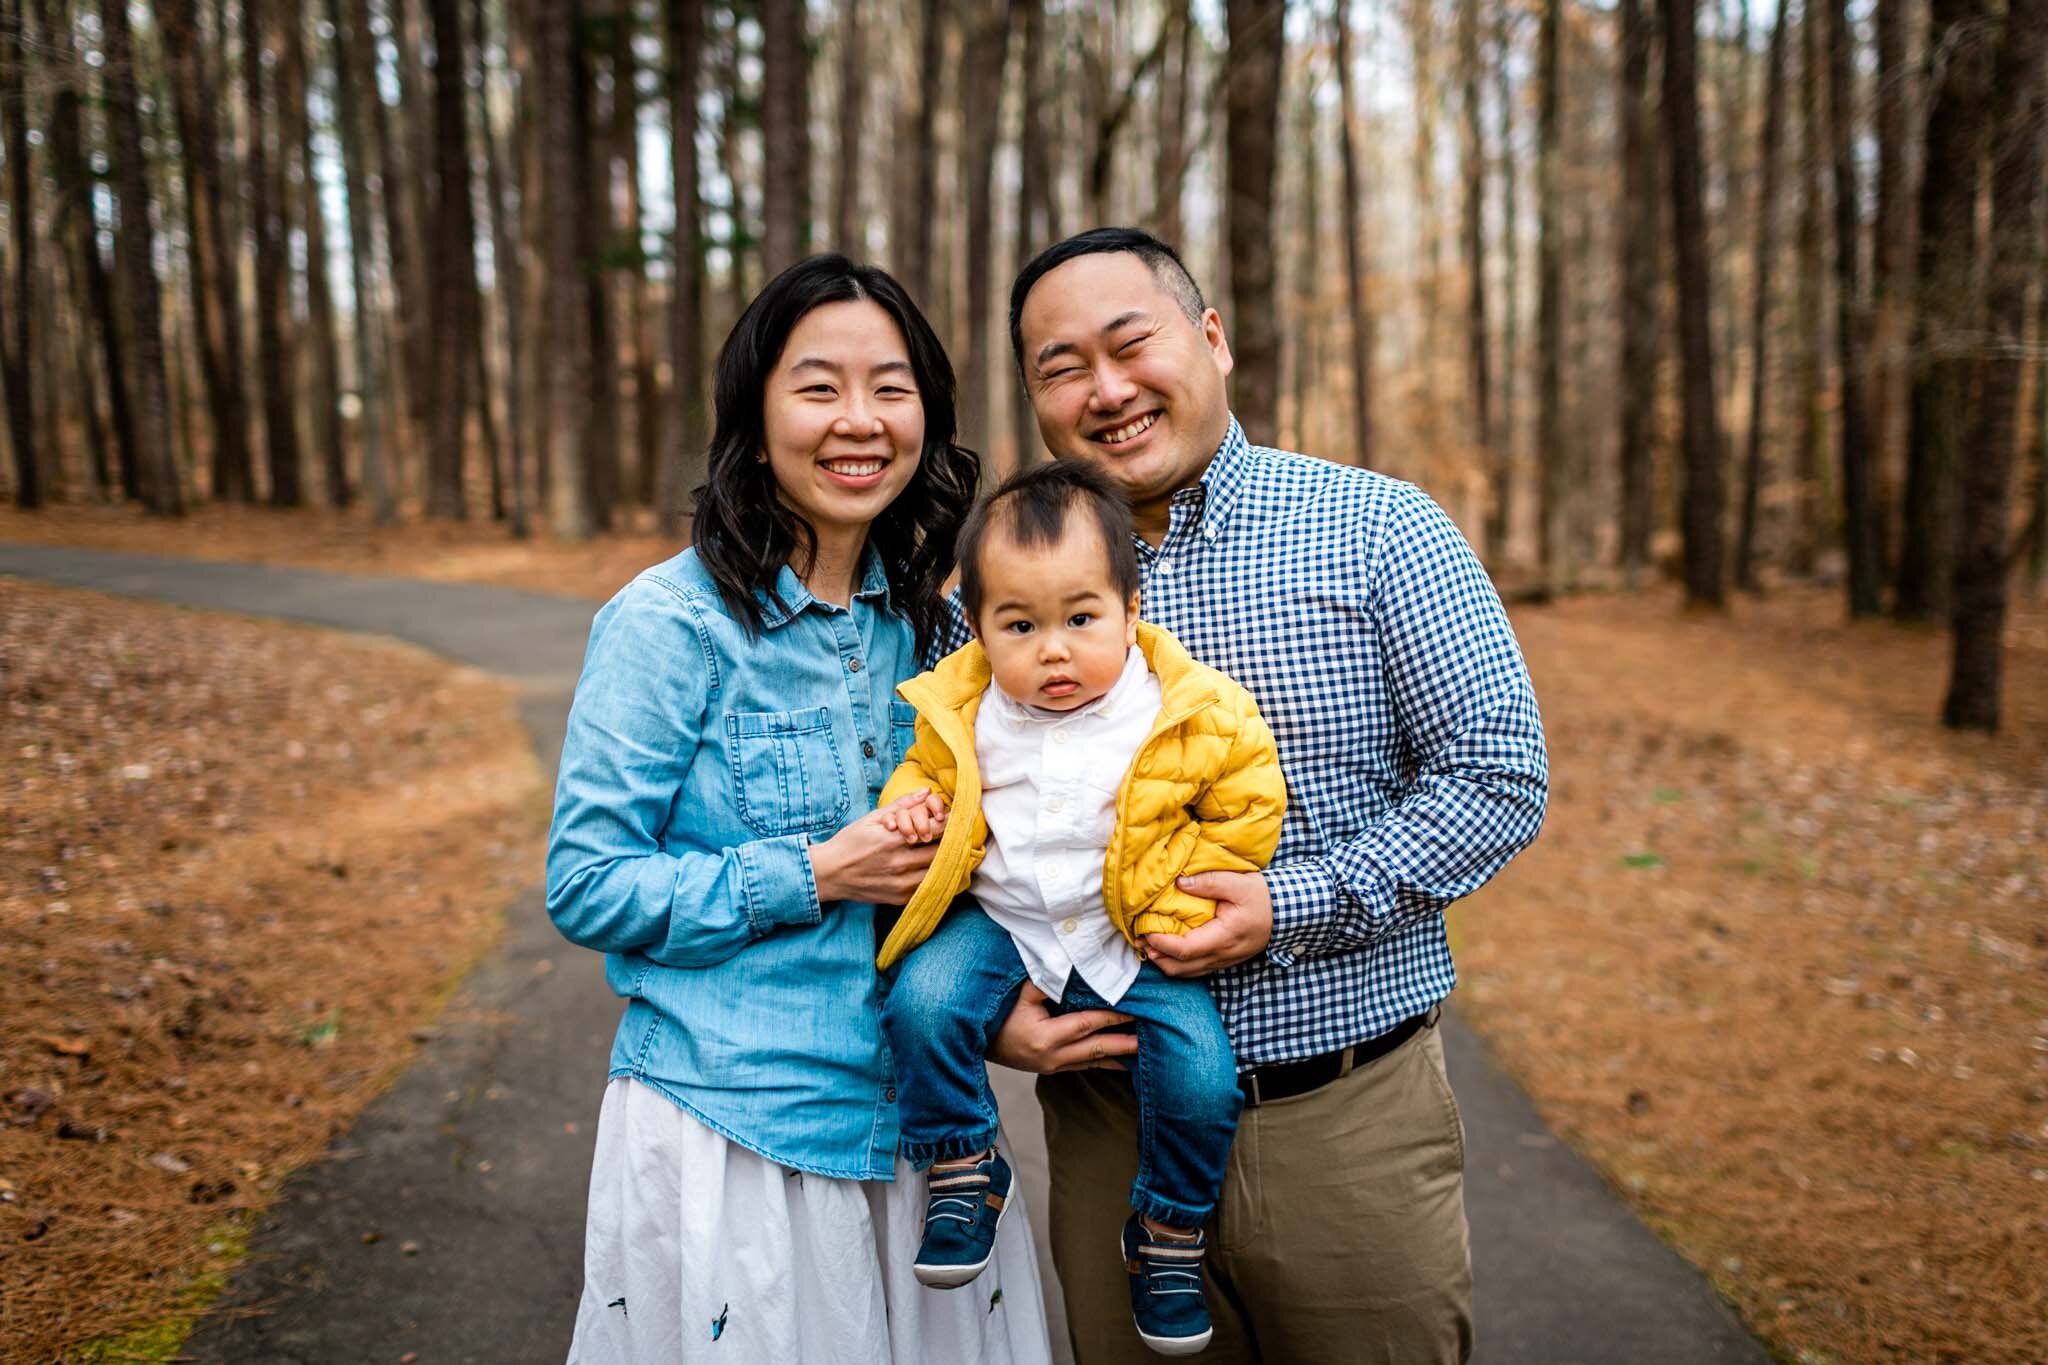 Raleigh Family Photographer | By G. Lin Photography | Umstead Park | Family of three standing in woods